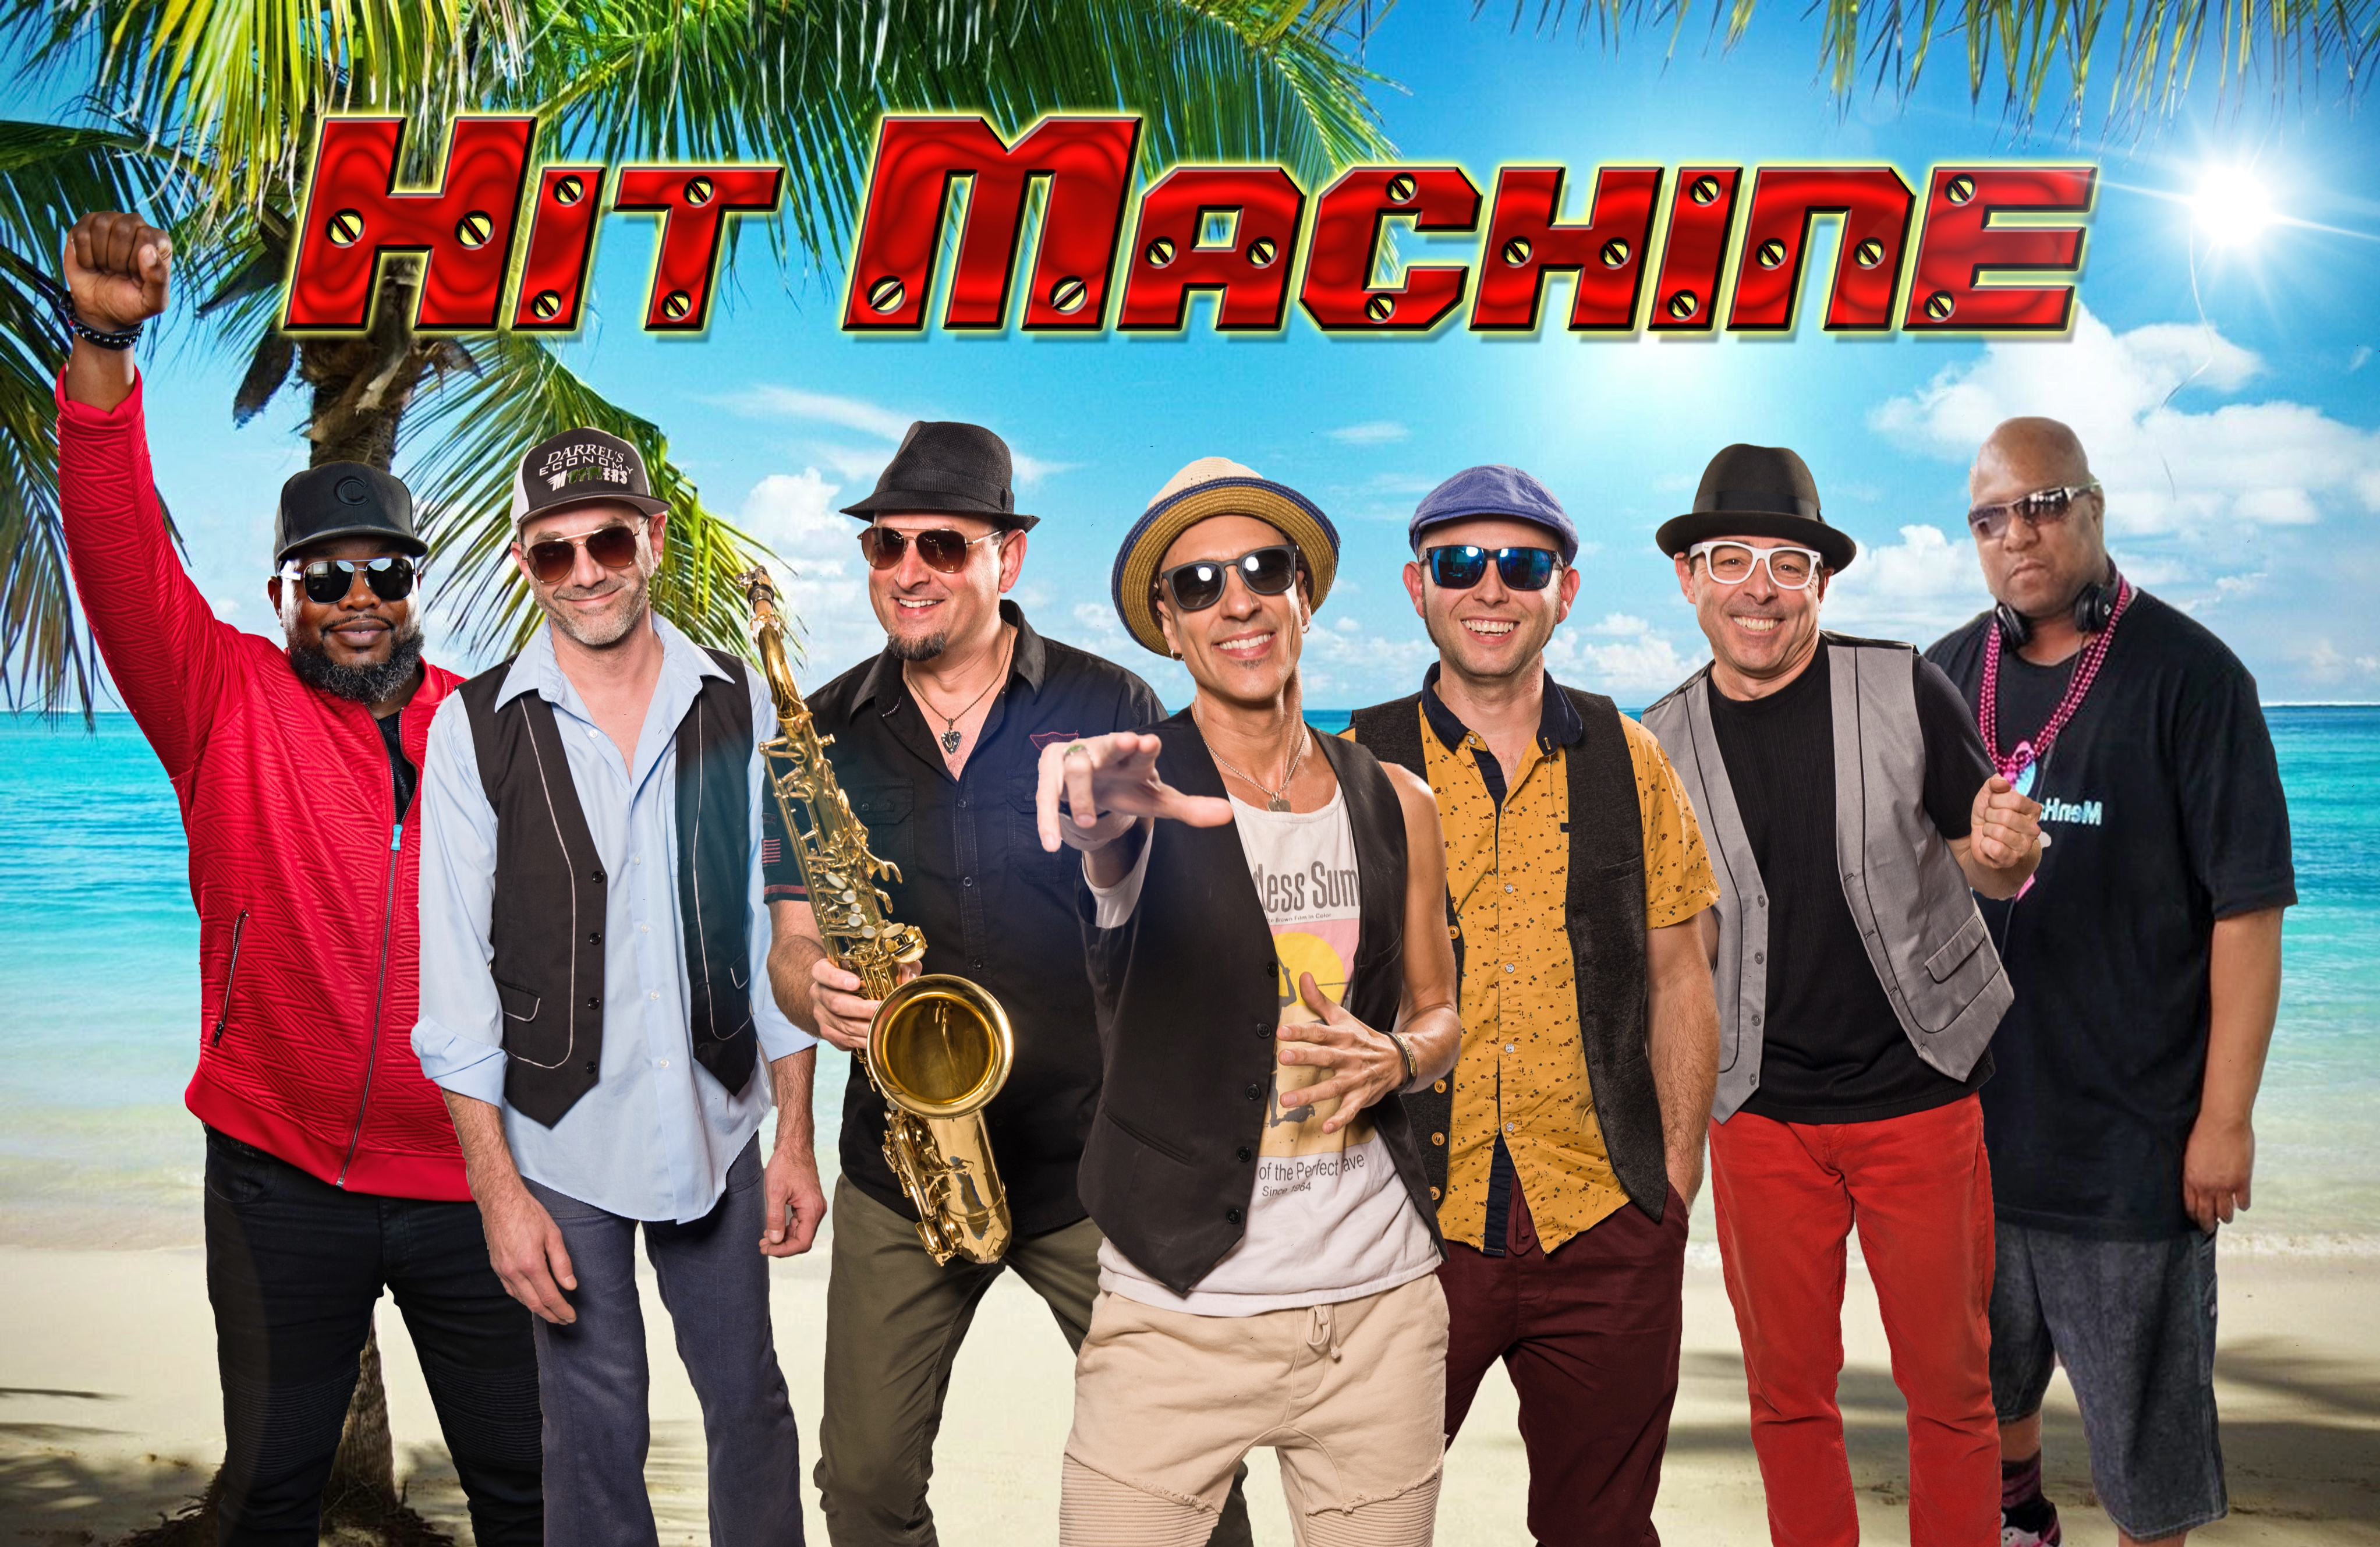 The 7-member band, Hit Machine, pose in front of an image of a beach with a palm tree. The band name is above them in block letters.